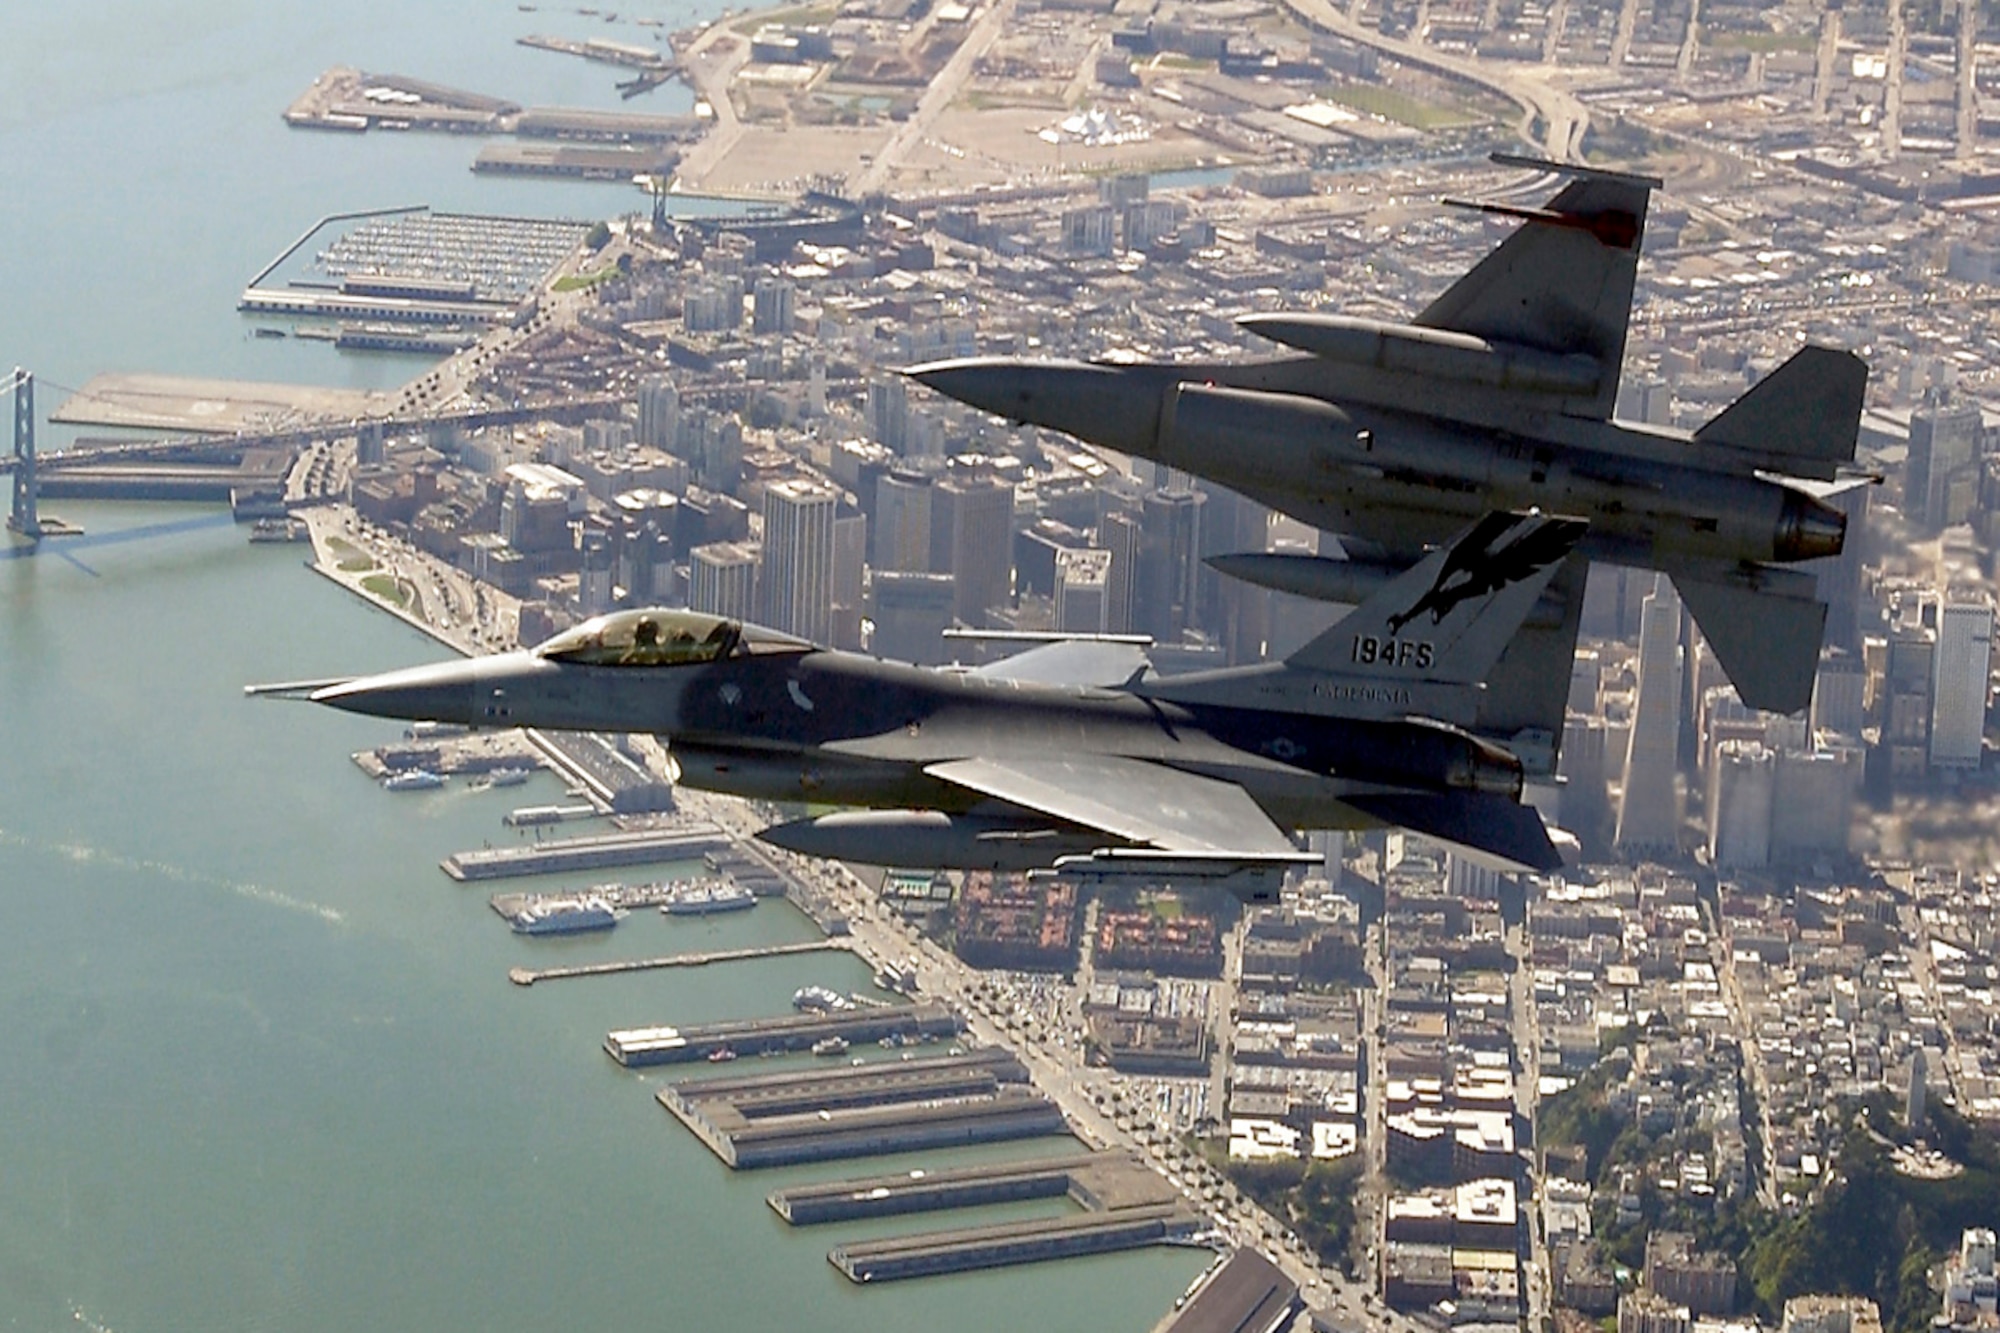 Two F-16 Fighting Falcons begin to roll into position for a rapid decent during an Operation Noble Eagle training patrol over San Francisco, Calif. The F-16s are assigned to the California Air National Guard's 144th Fighter Wing in Fresno, Calif.  (U.S. Air Force photo by Master Sgt. Lance Cheung)